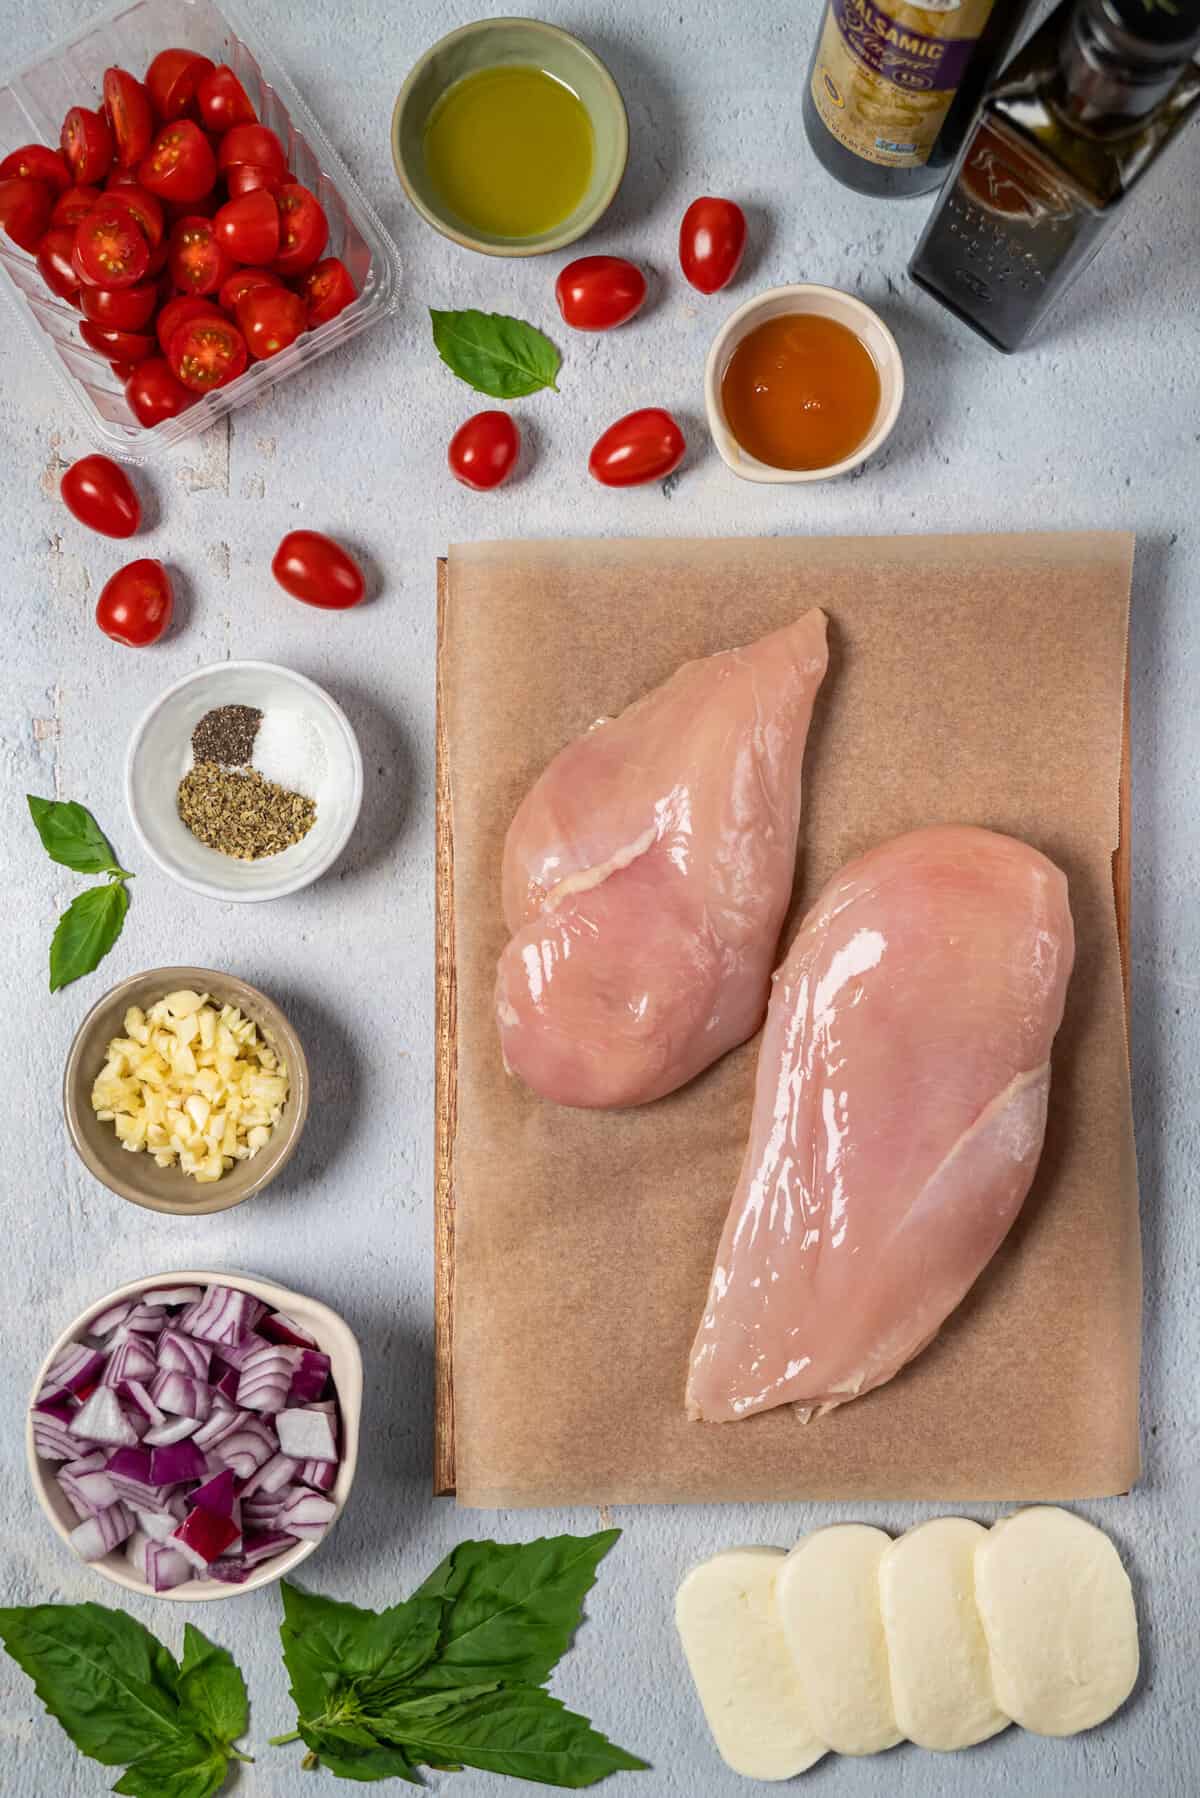 The ingredients for chicken caprese are spread out on a white surface.